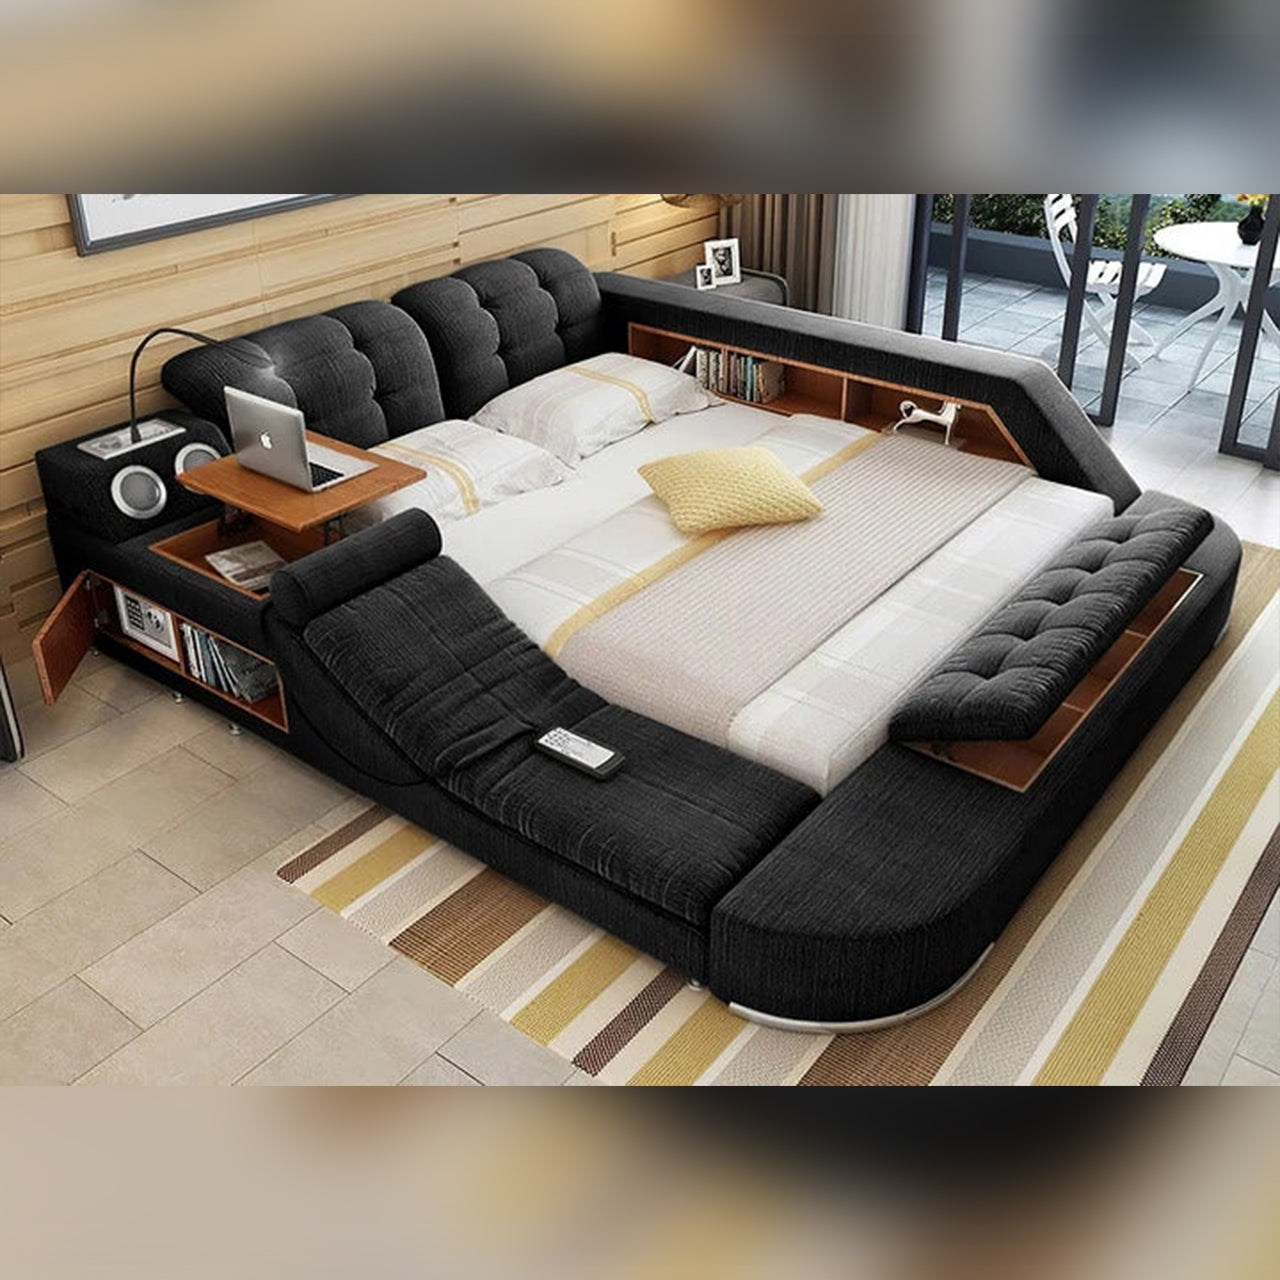 Smart Bed HUNK Tech Smart Ultimate Bed High Tech Furniture